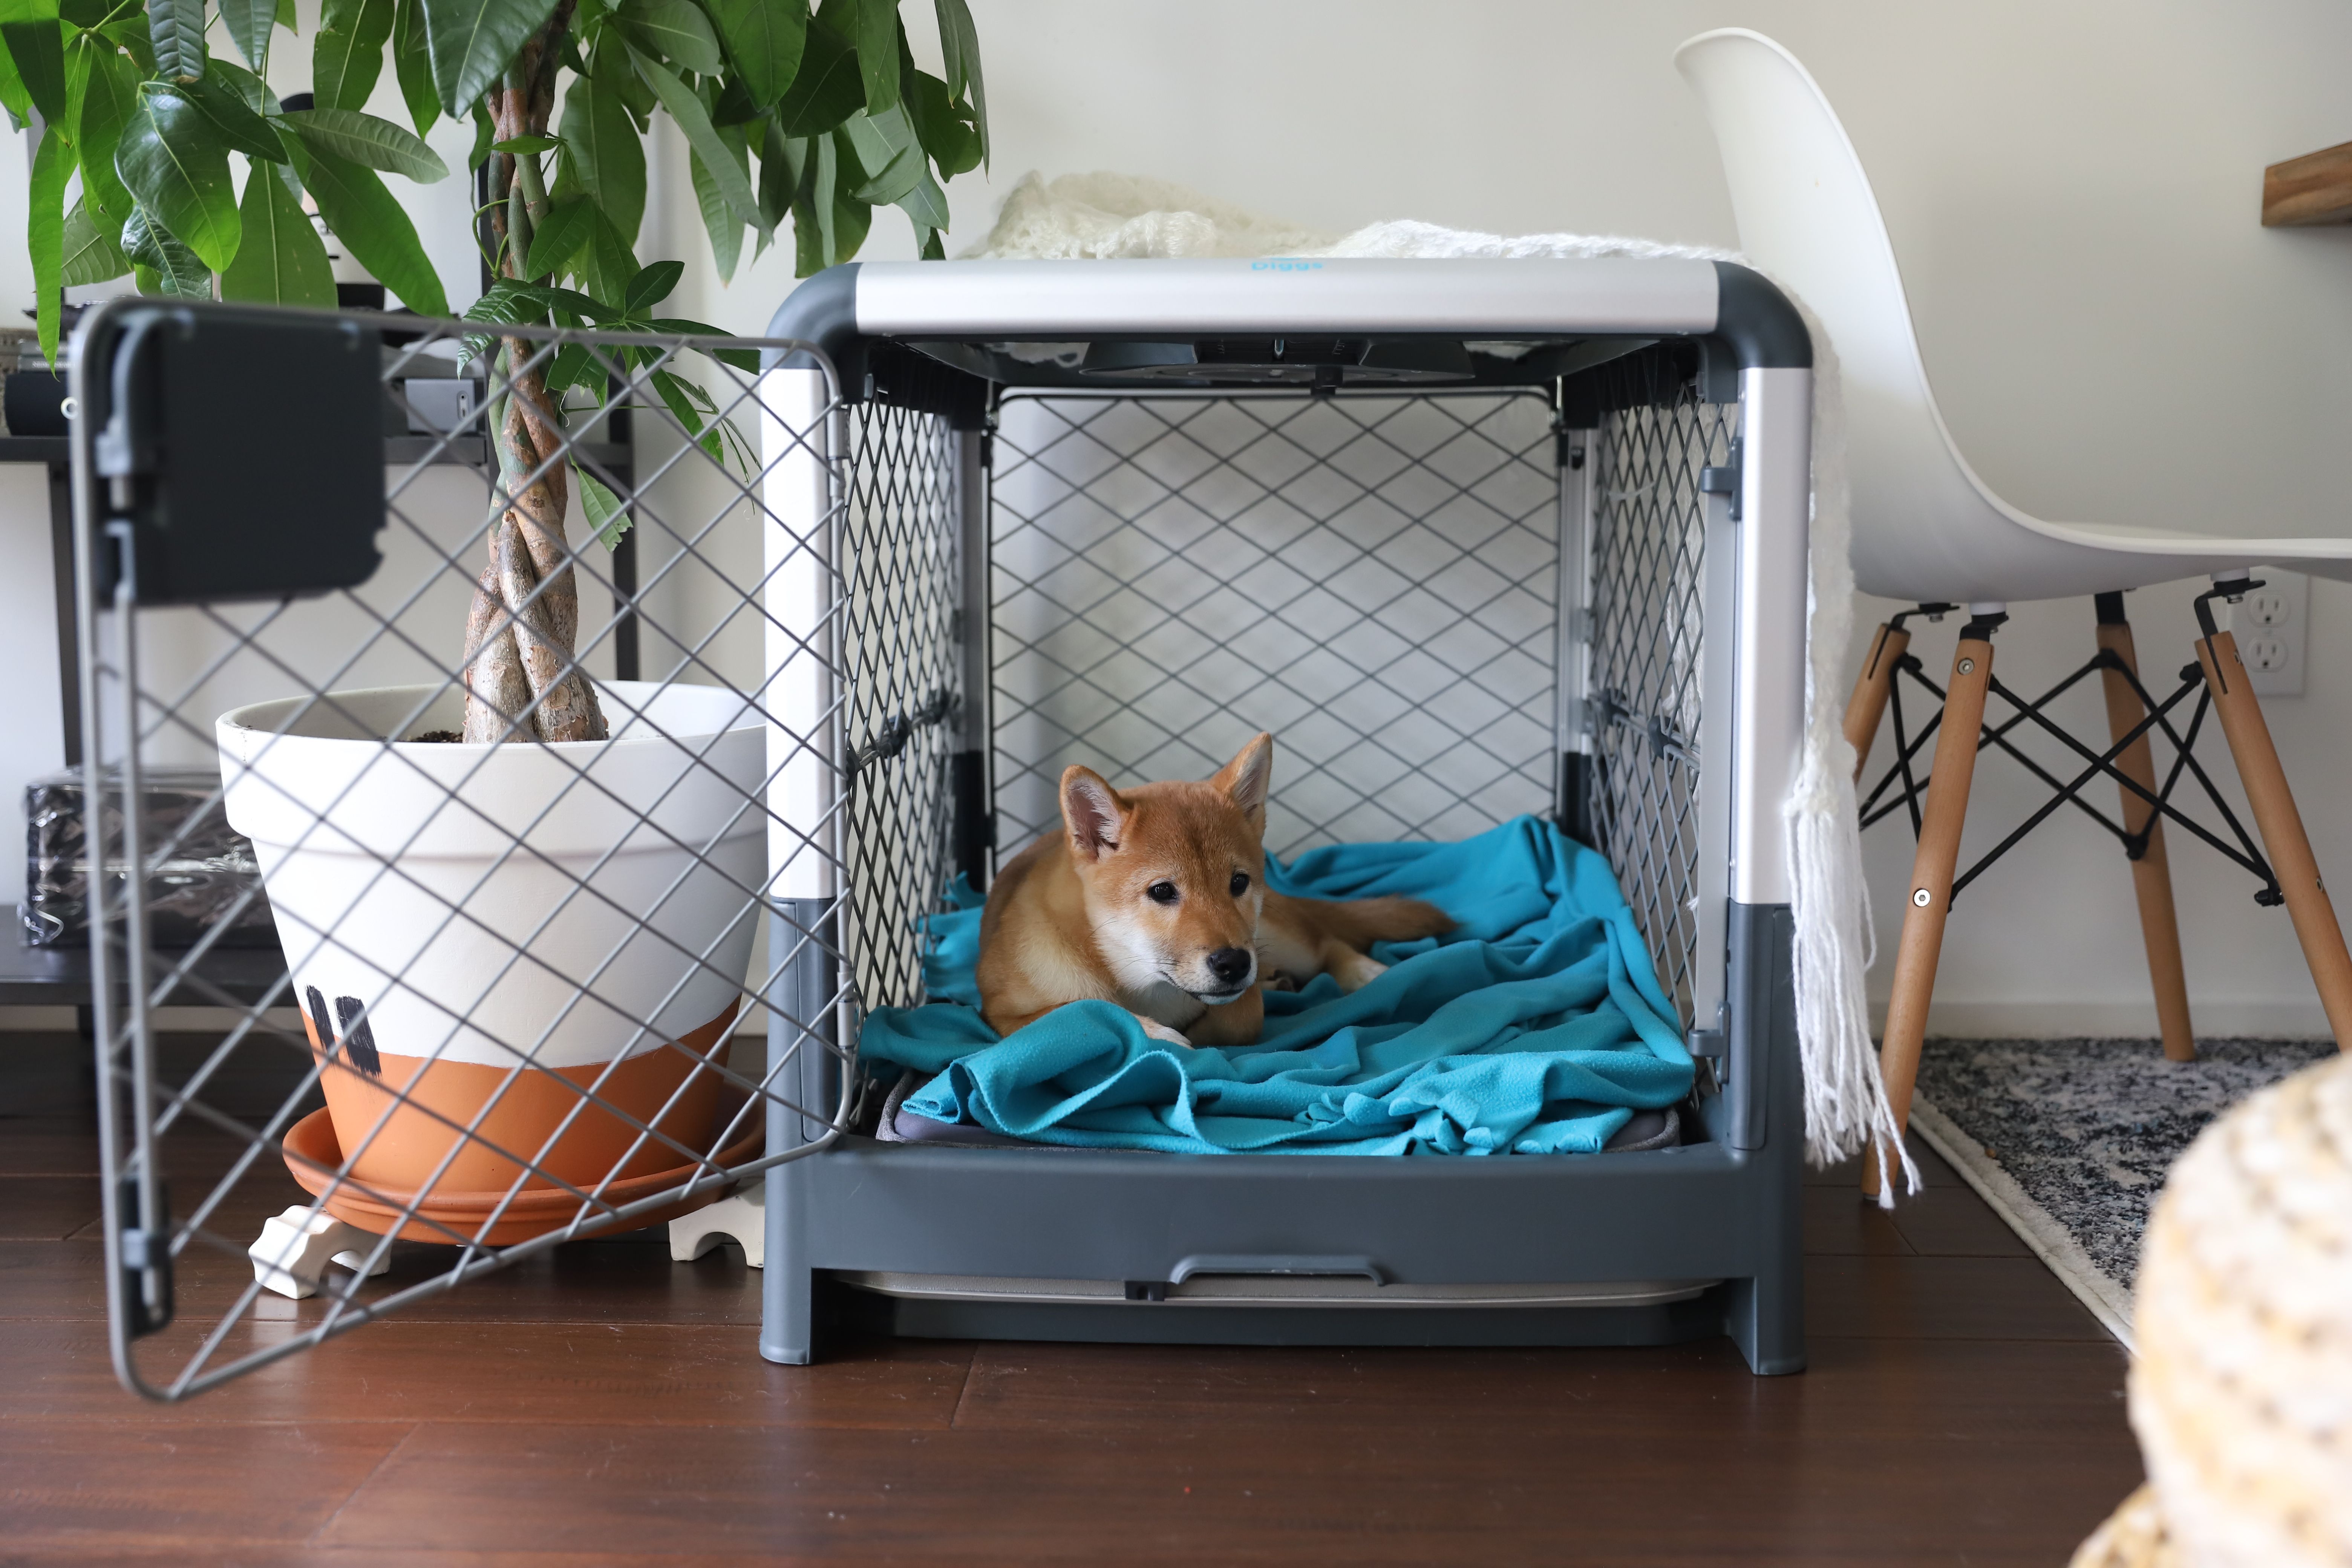 What Is Crate Training? Why Is It Important? - Diggs